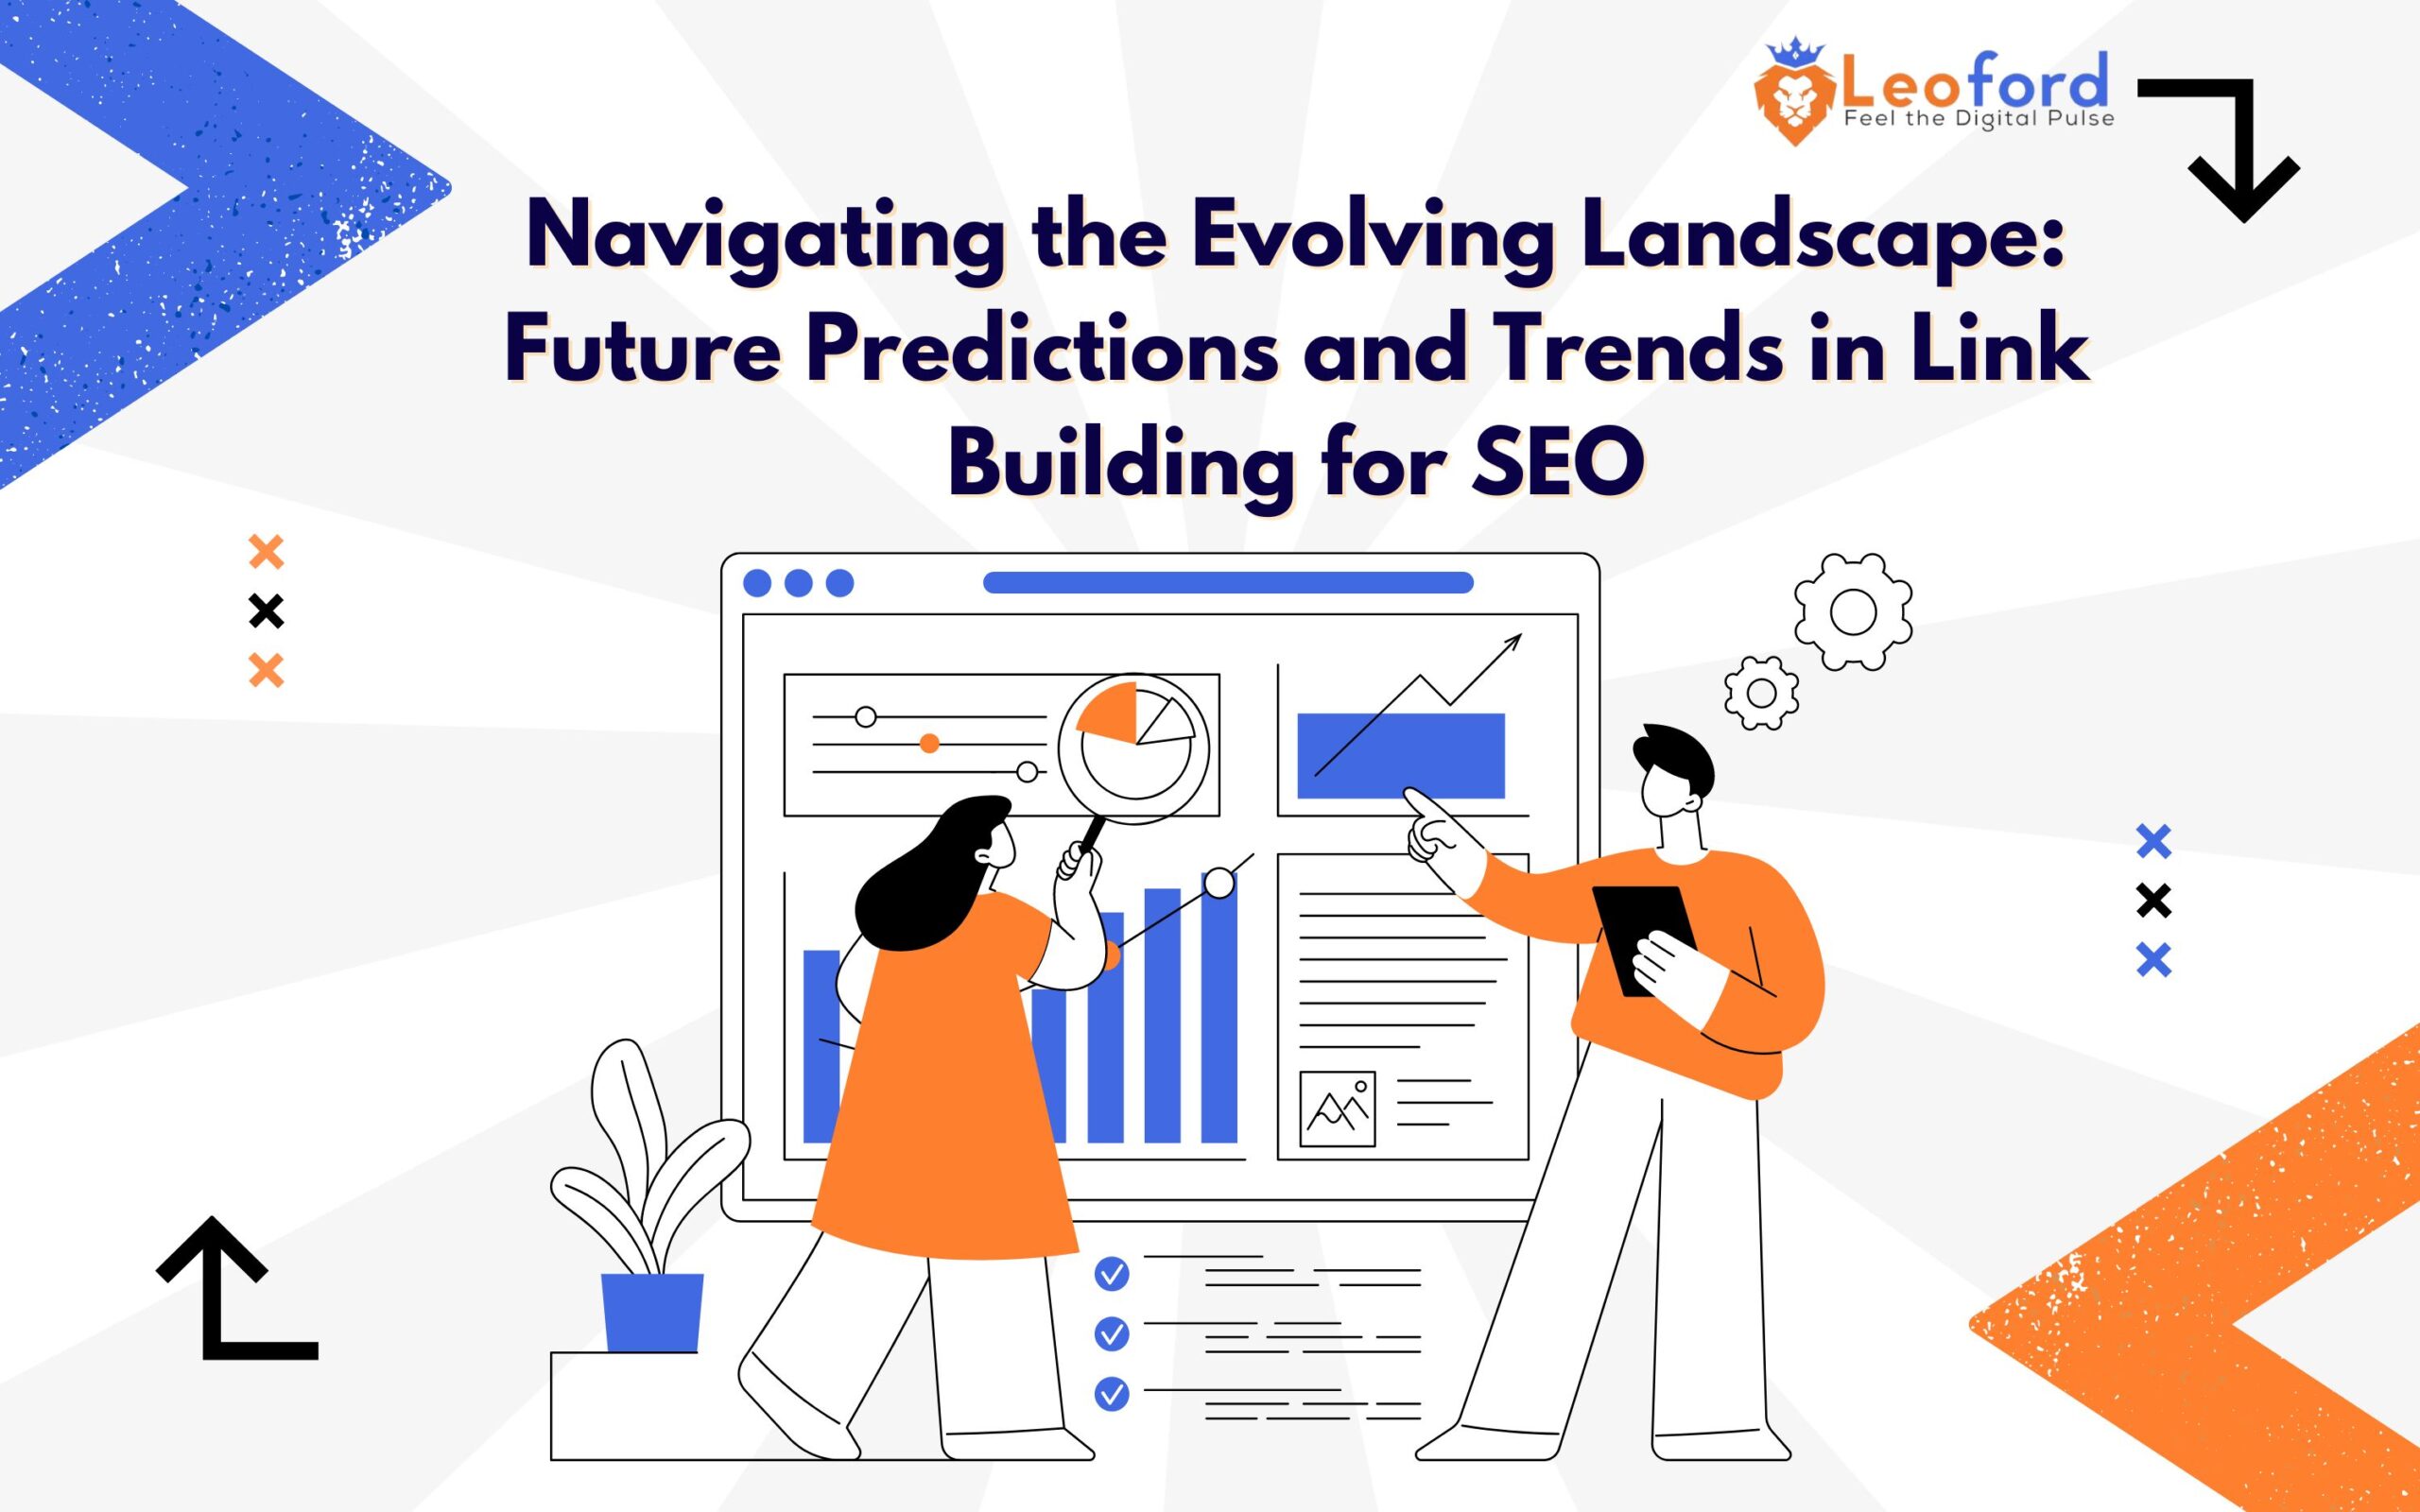 Navigating the Evolving Landscape: Future Predictions and Trends in Link Building for SEO